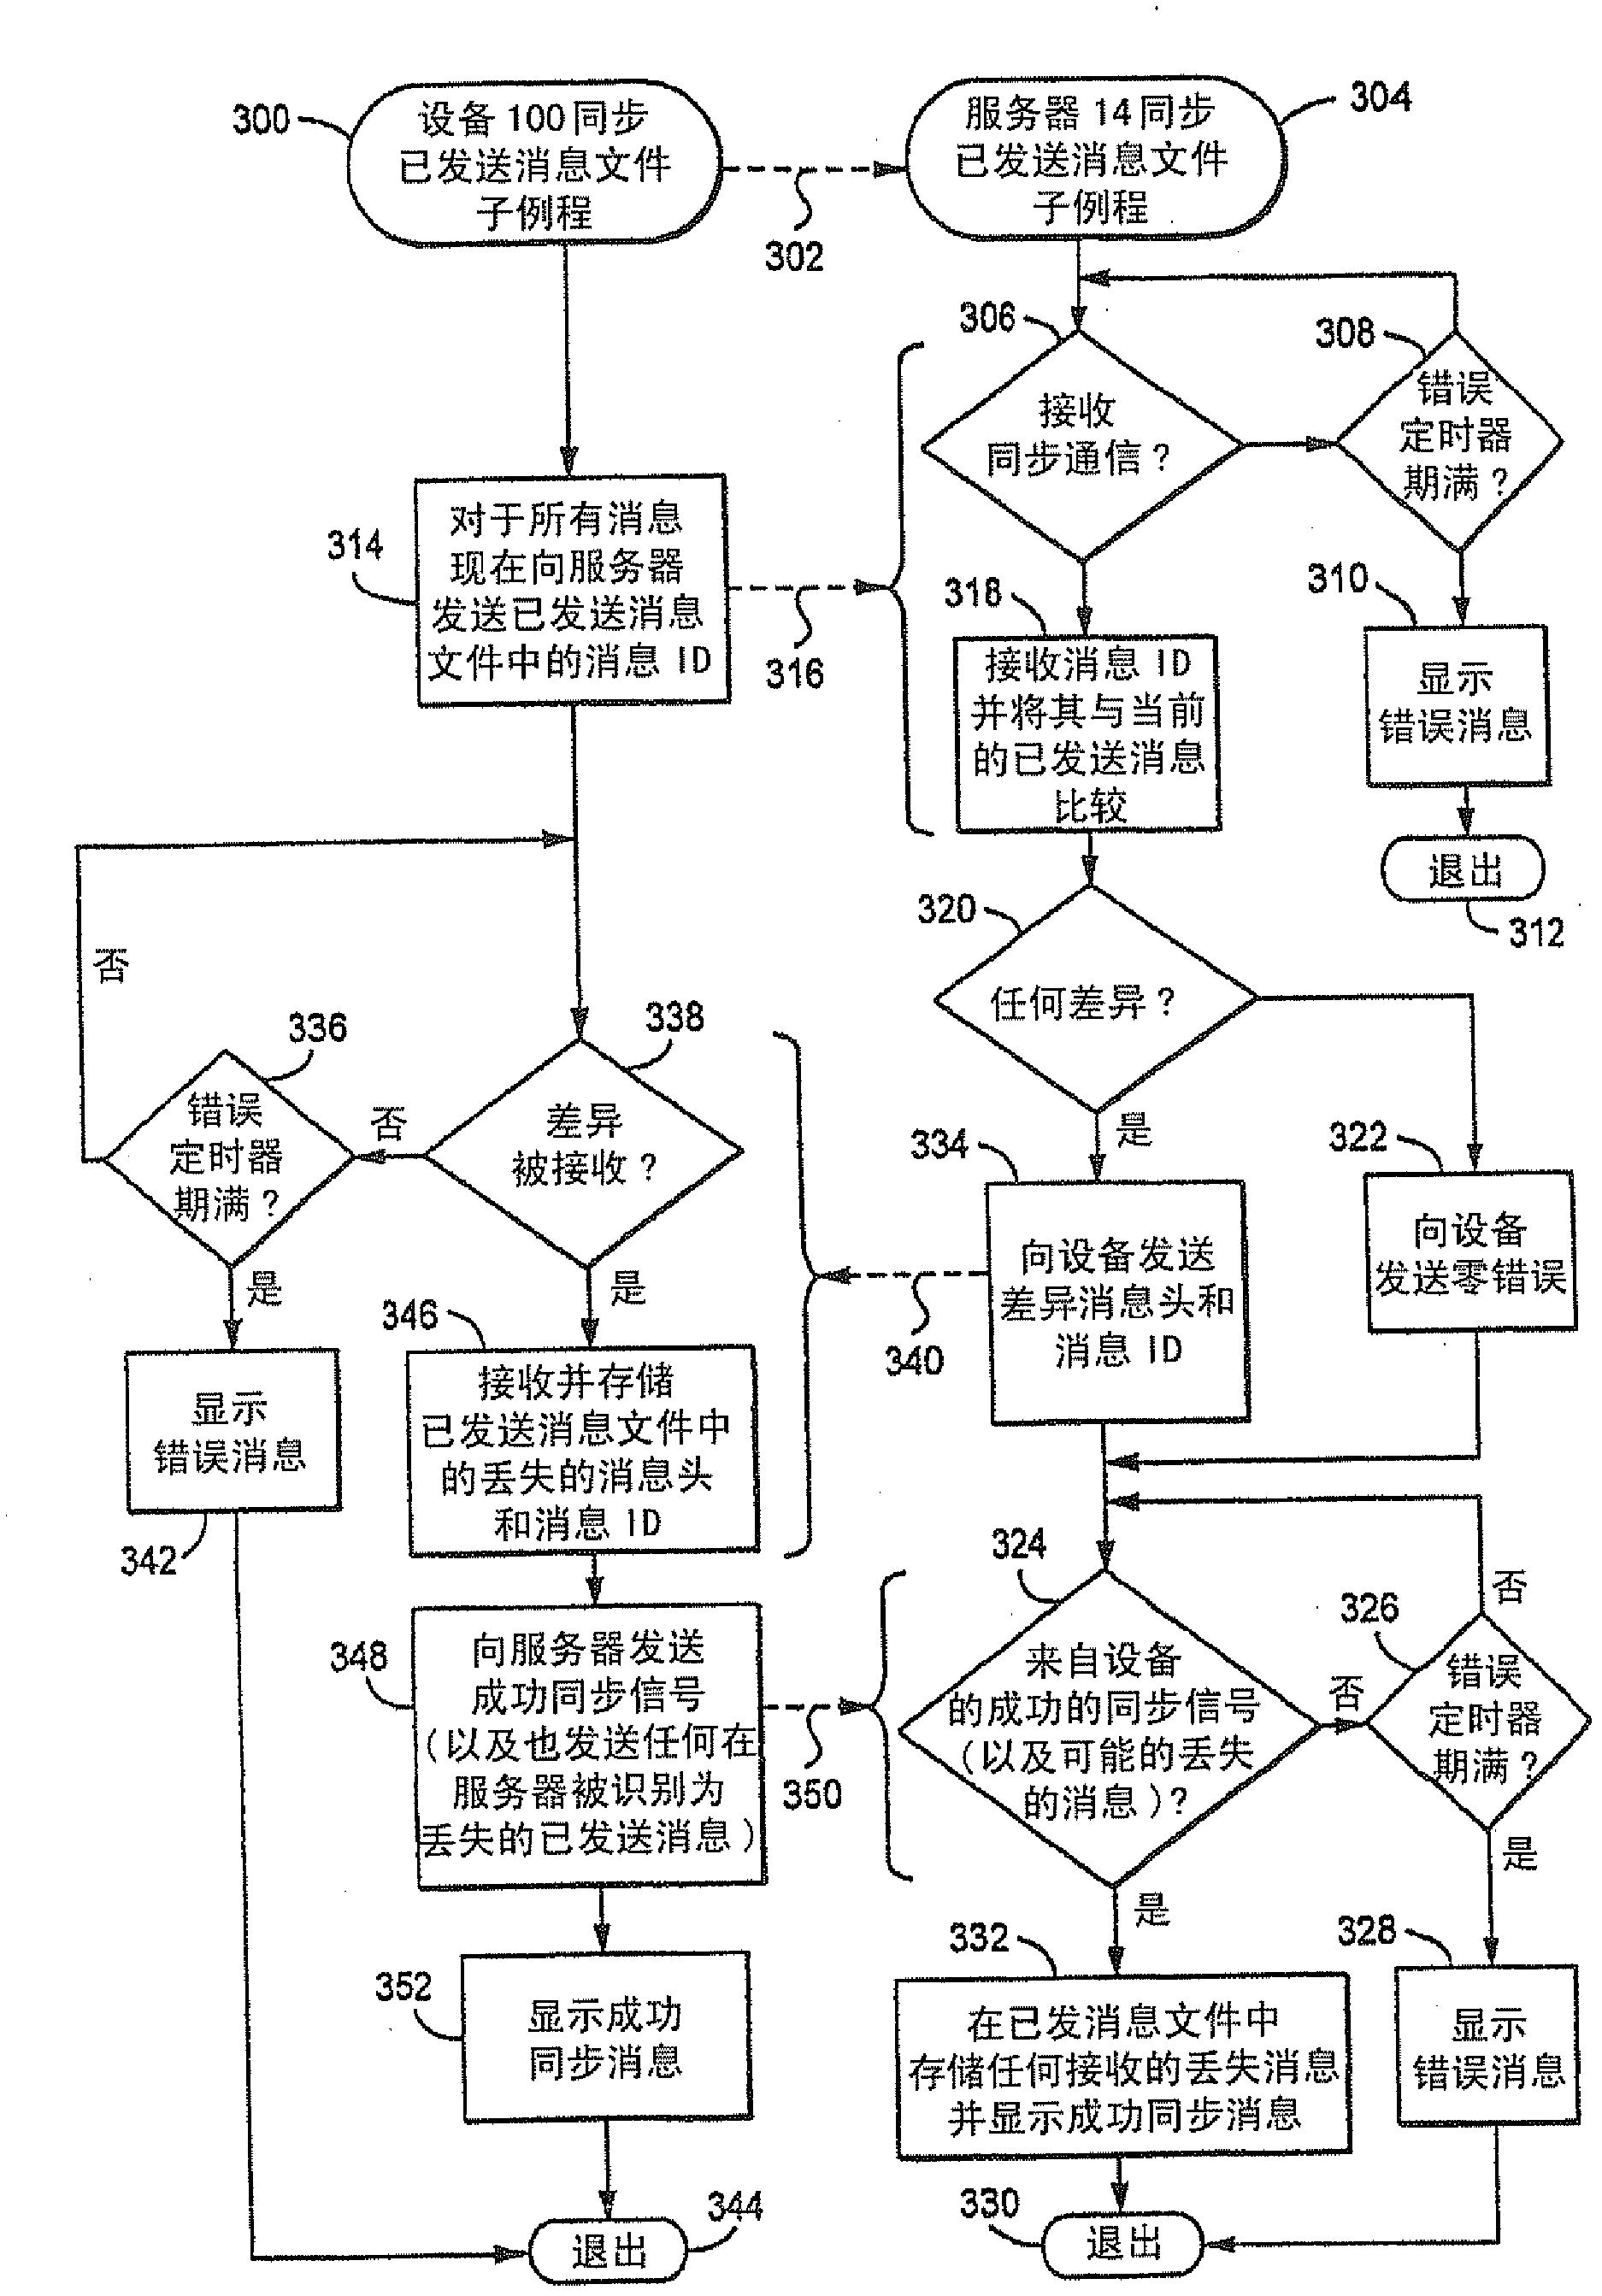 Method and apparatus for efficient resending of messages using message id